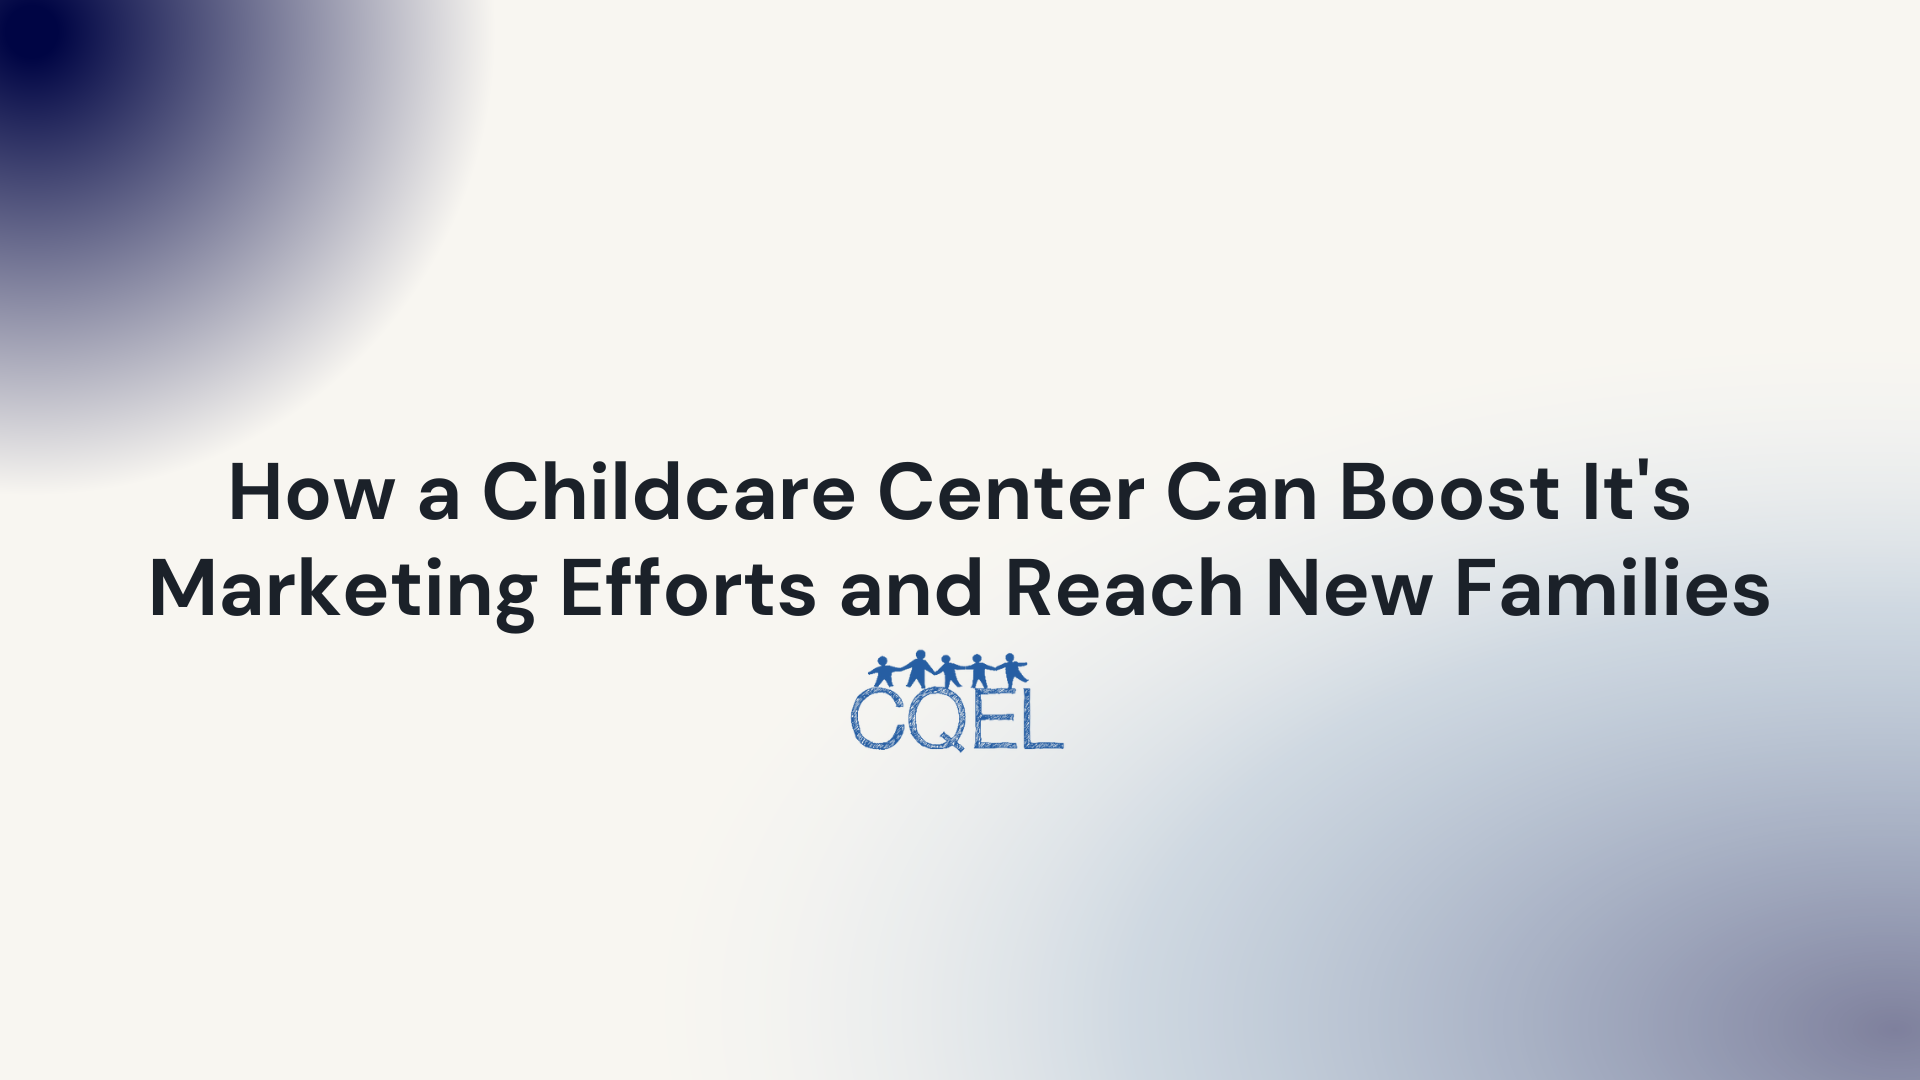 How a Childcare Center Can Boost It's Marketing Efforts and Reach New Families